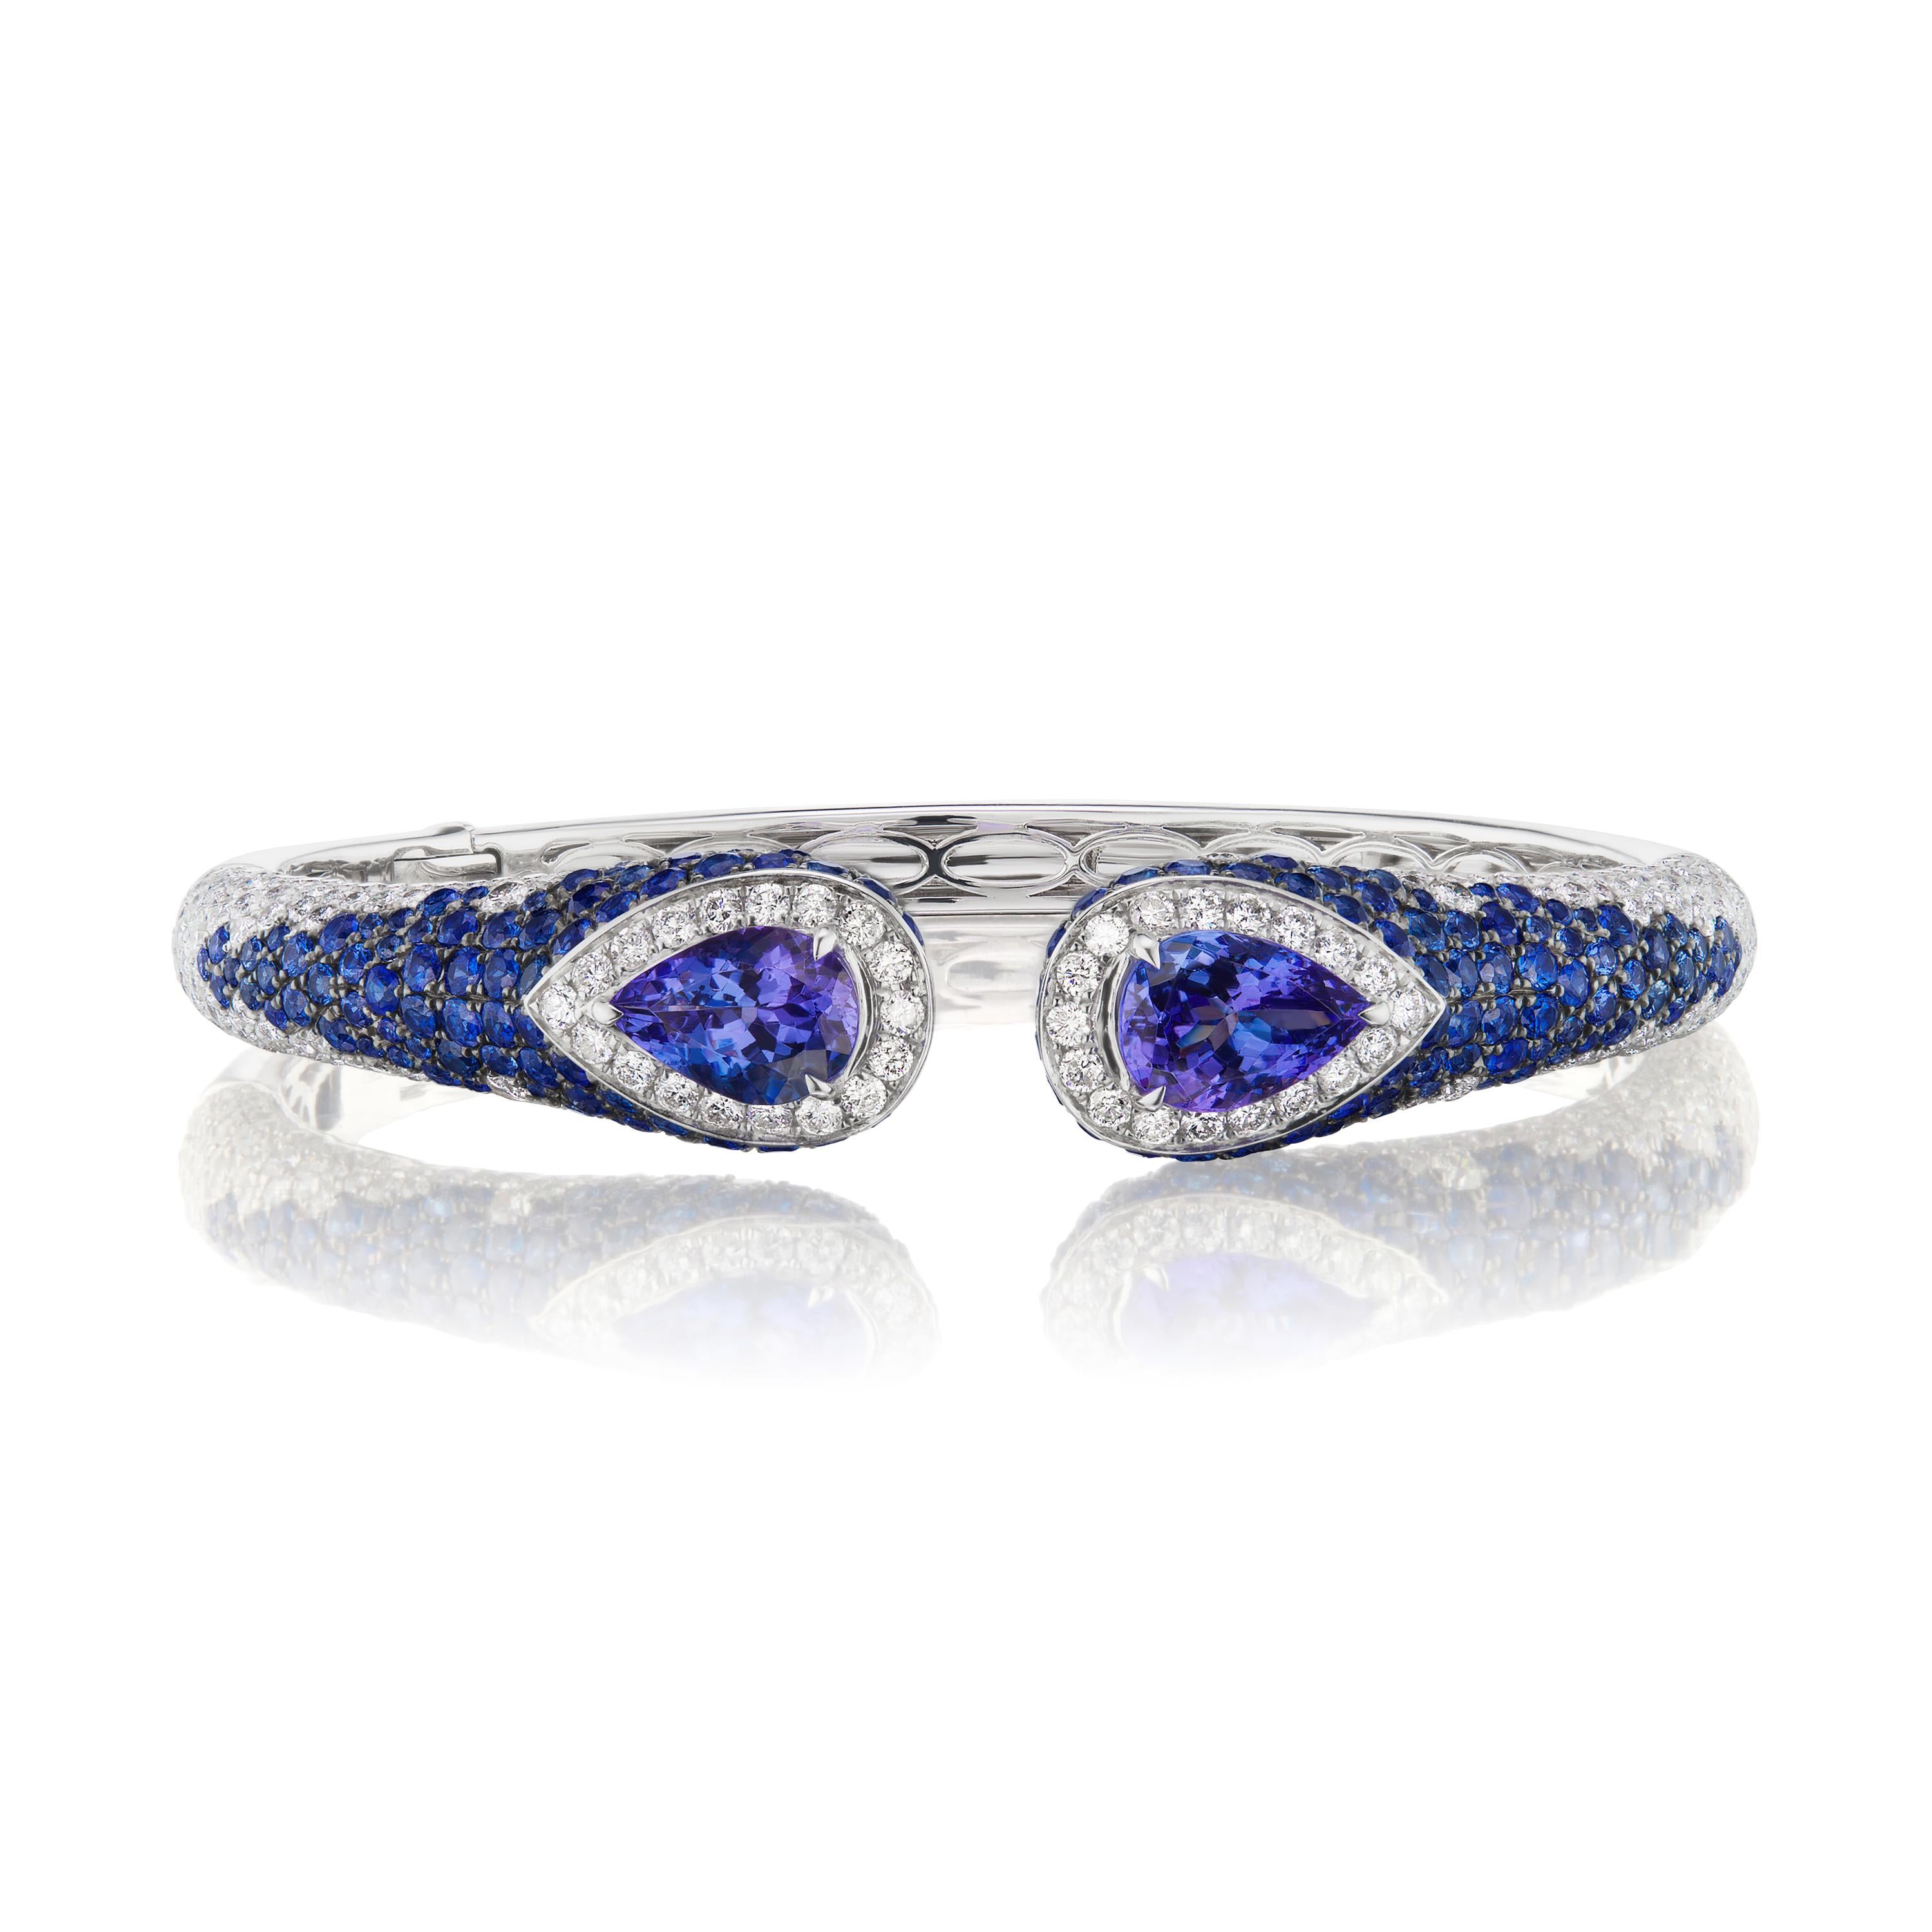 The dazzling blue artistry is done around the pear 4.36 carat blue tanzanite prong set in a dazzling halo of white diamonds. The shoulders of the bangle are further accentuated by the spray of 4.38 Ct. t.w. blue sapphire and white diamonds around